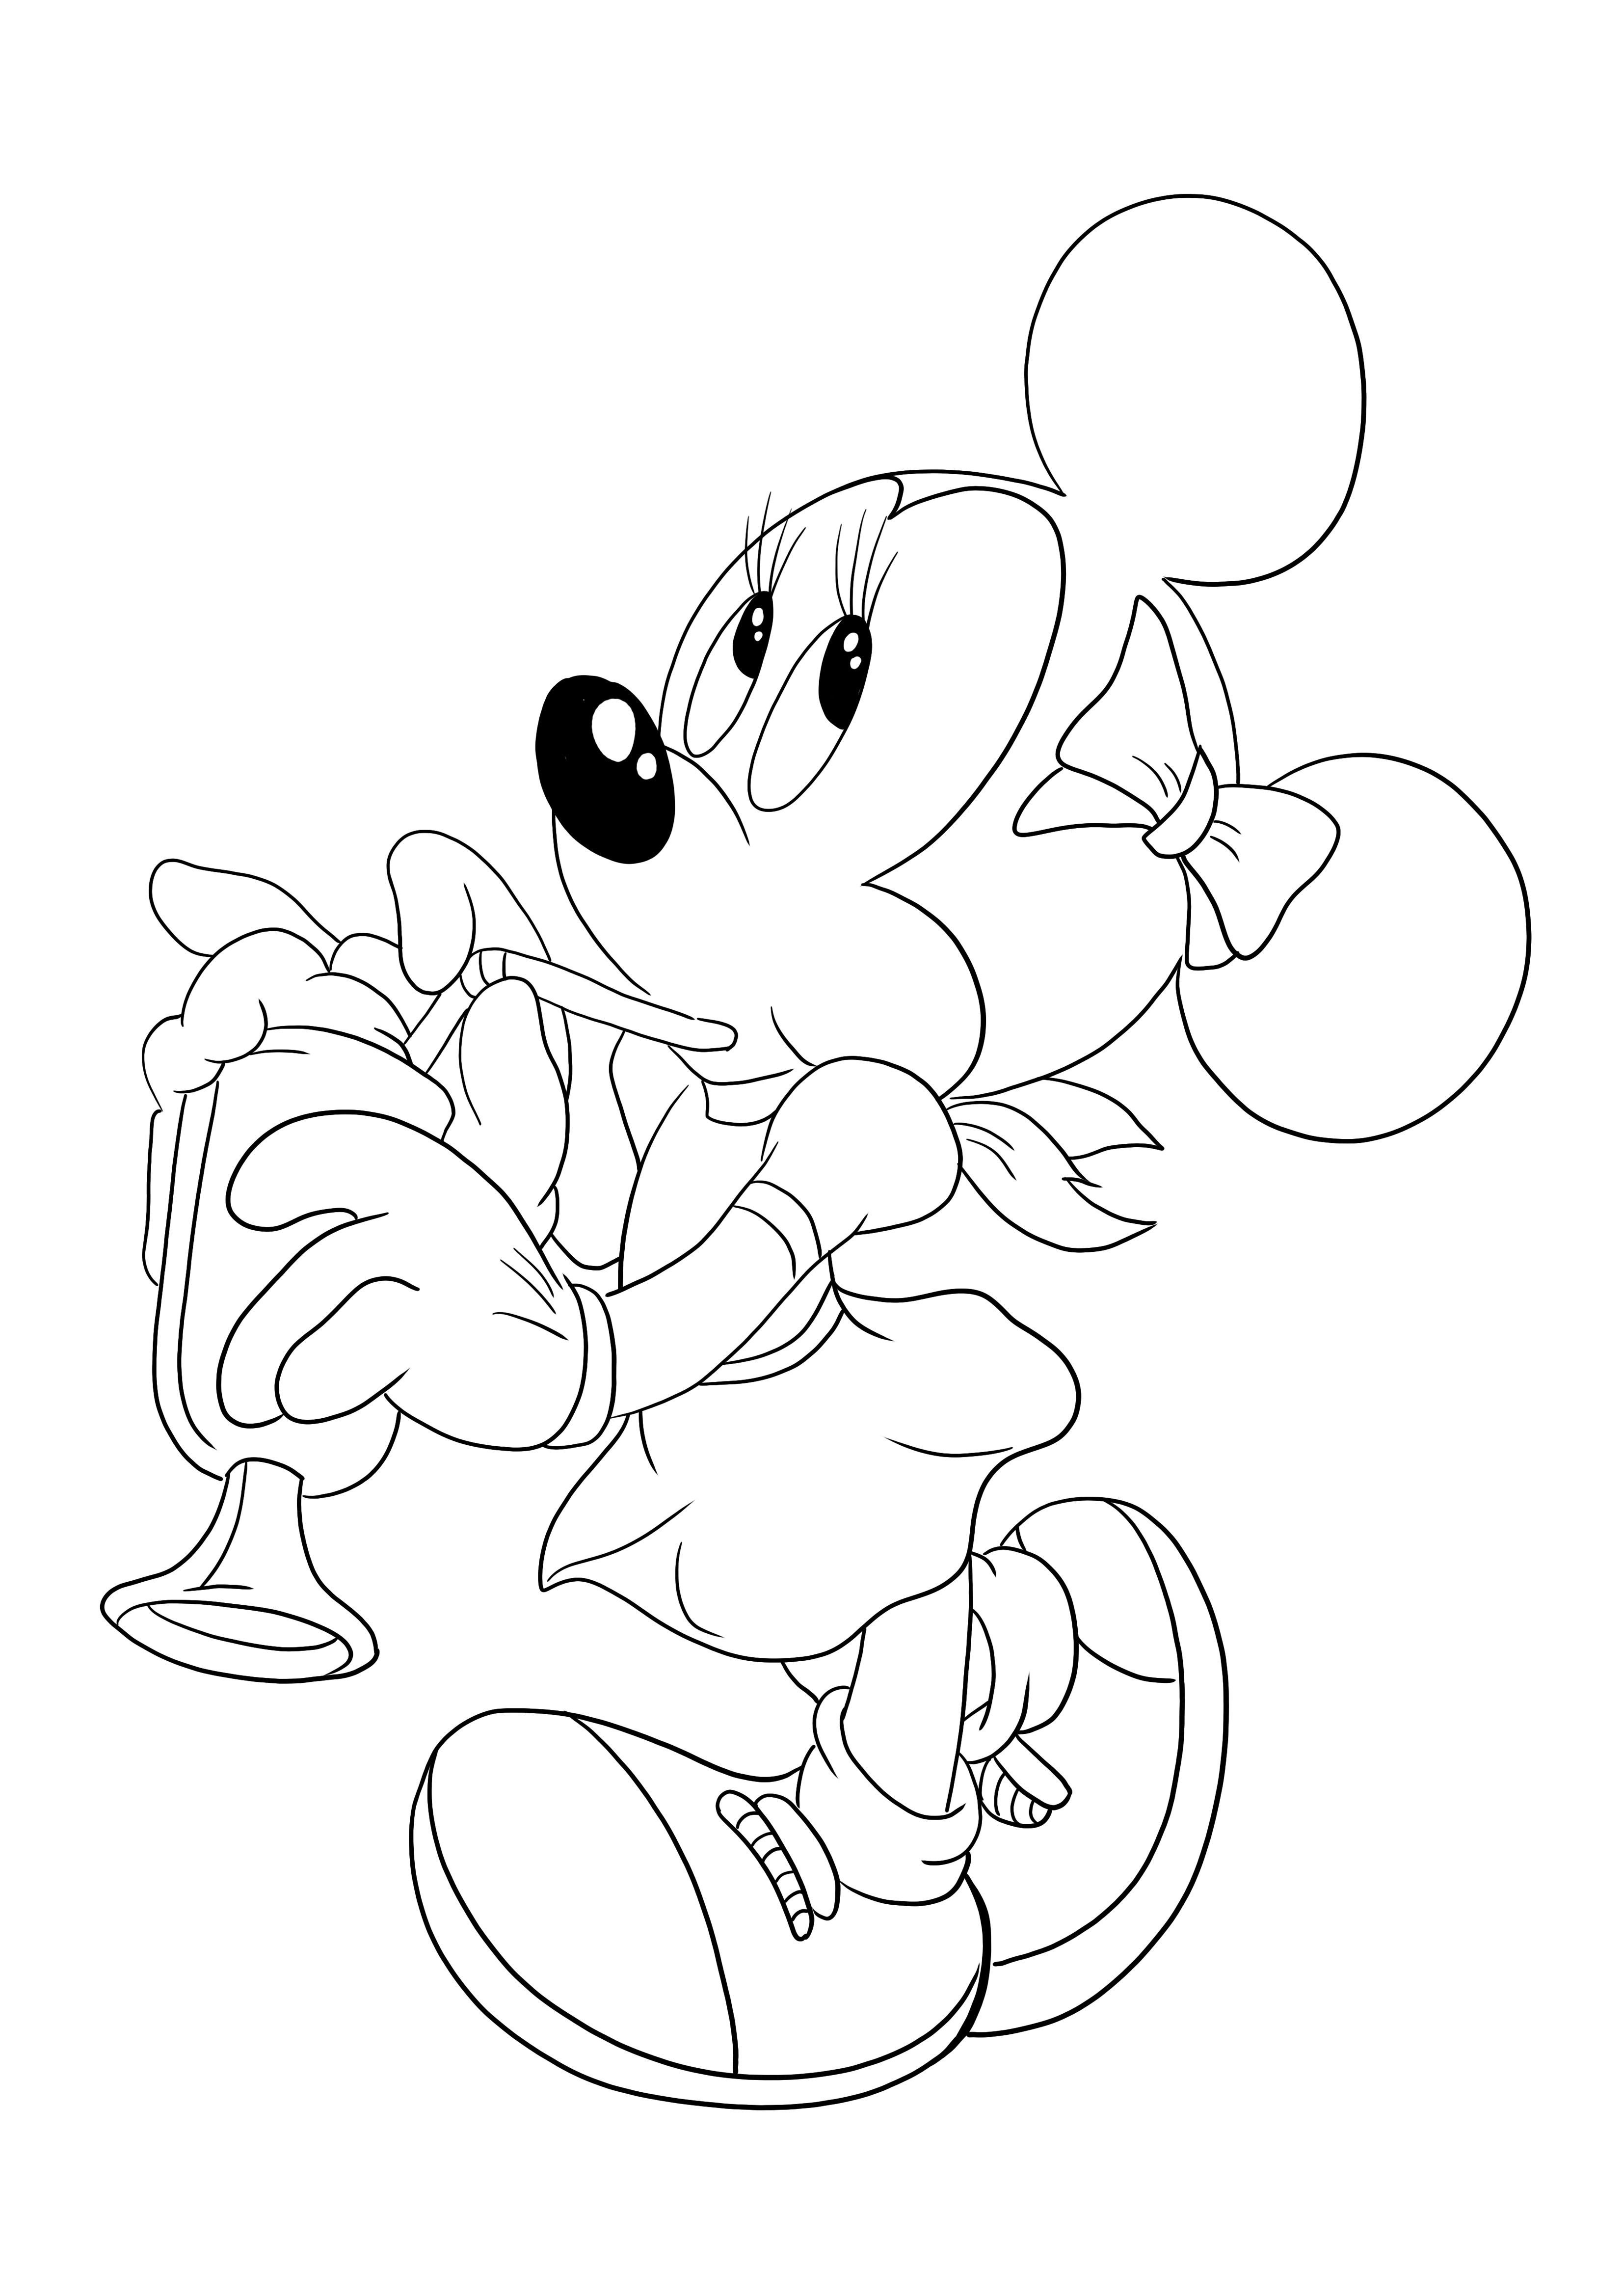 Minnie Mouse drinking through a straw for free downloading and coloring sheet